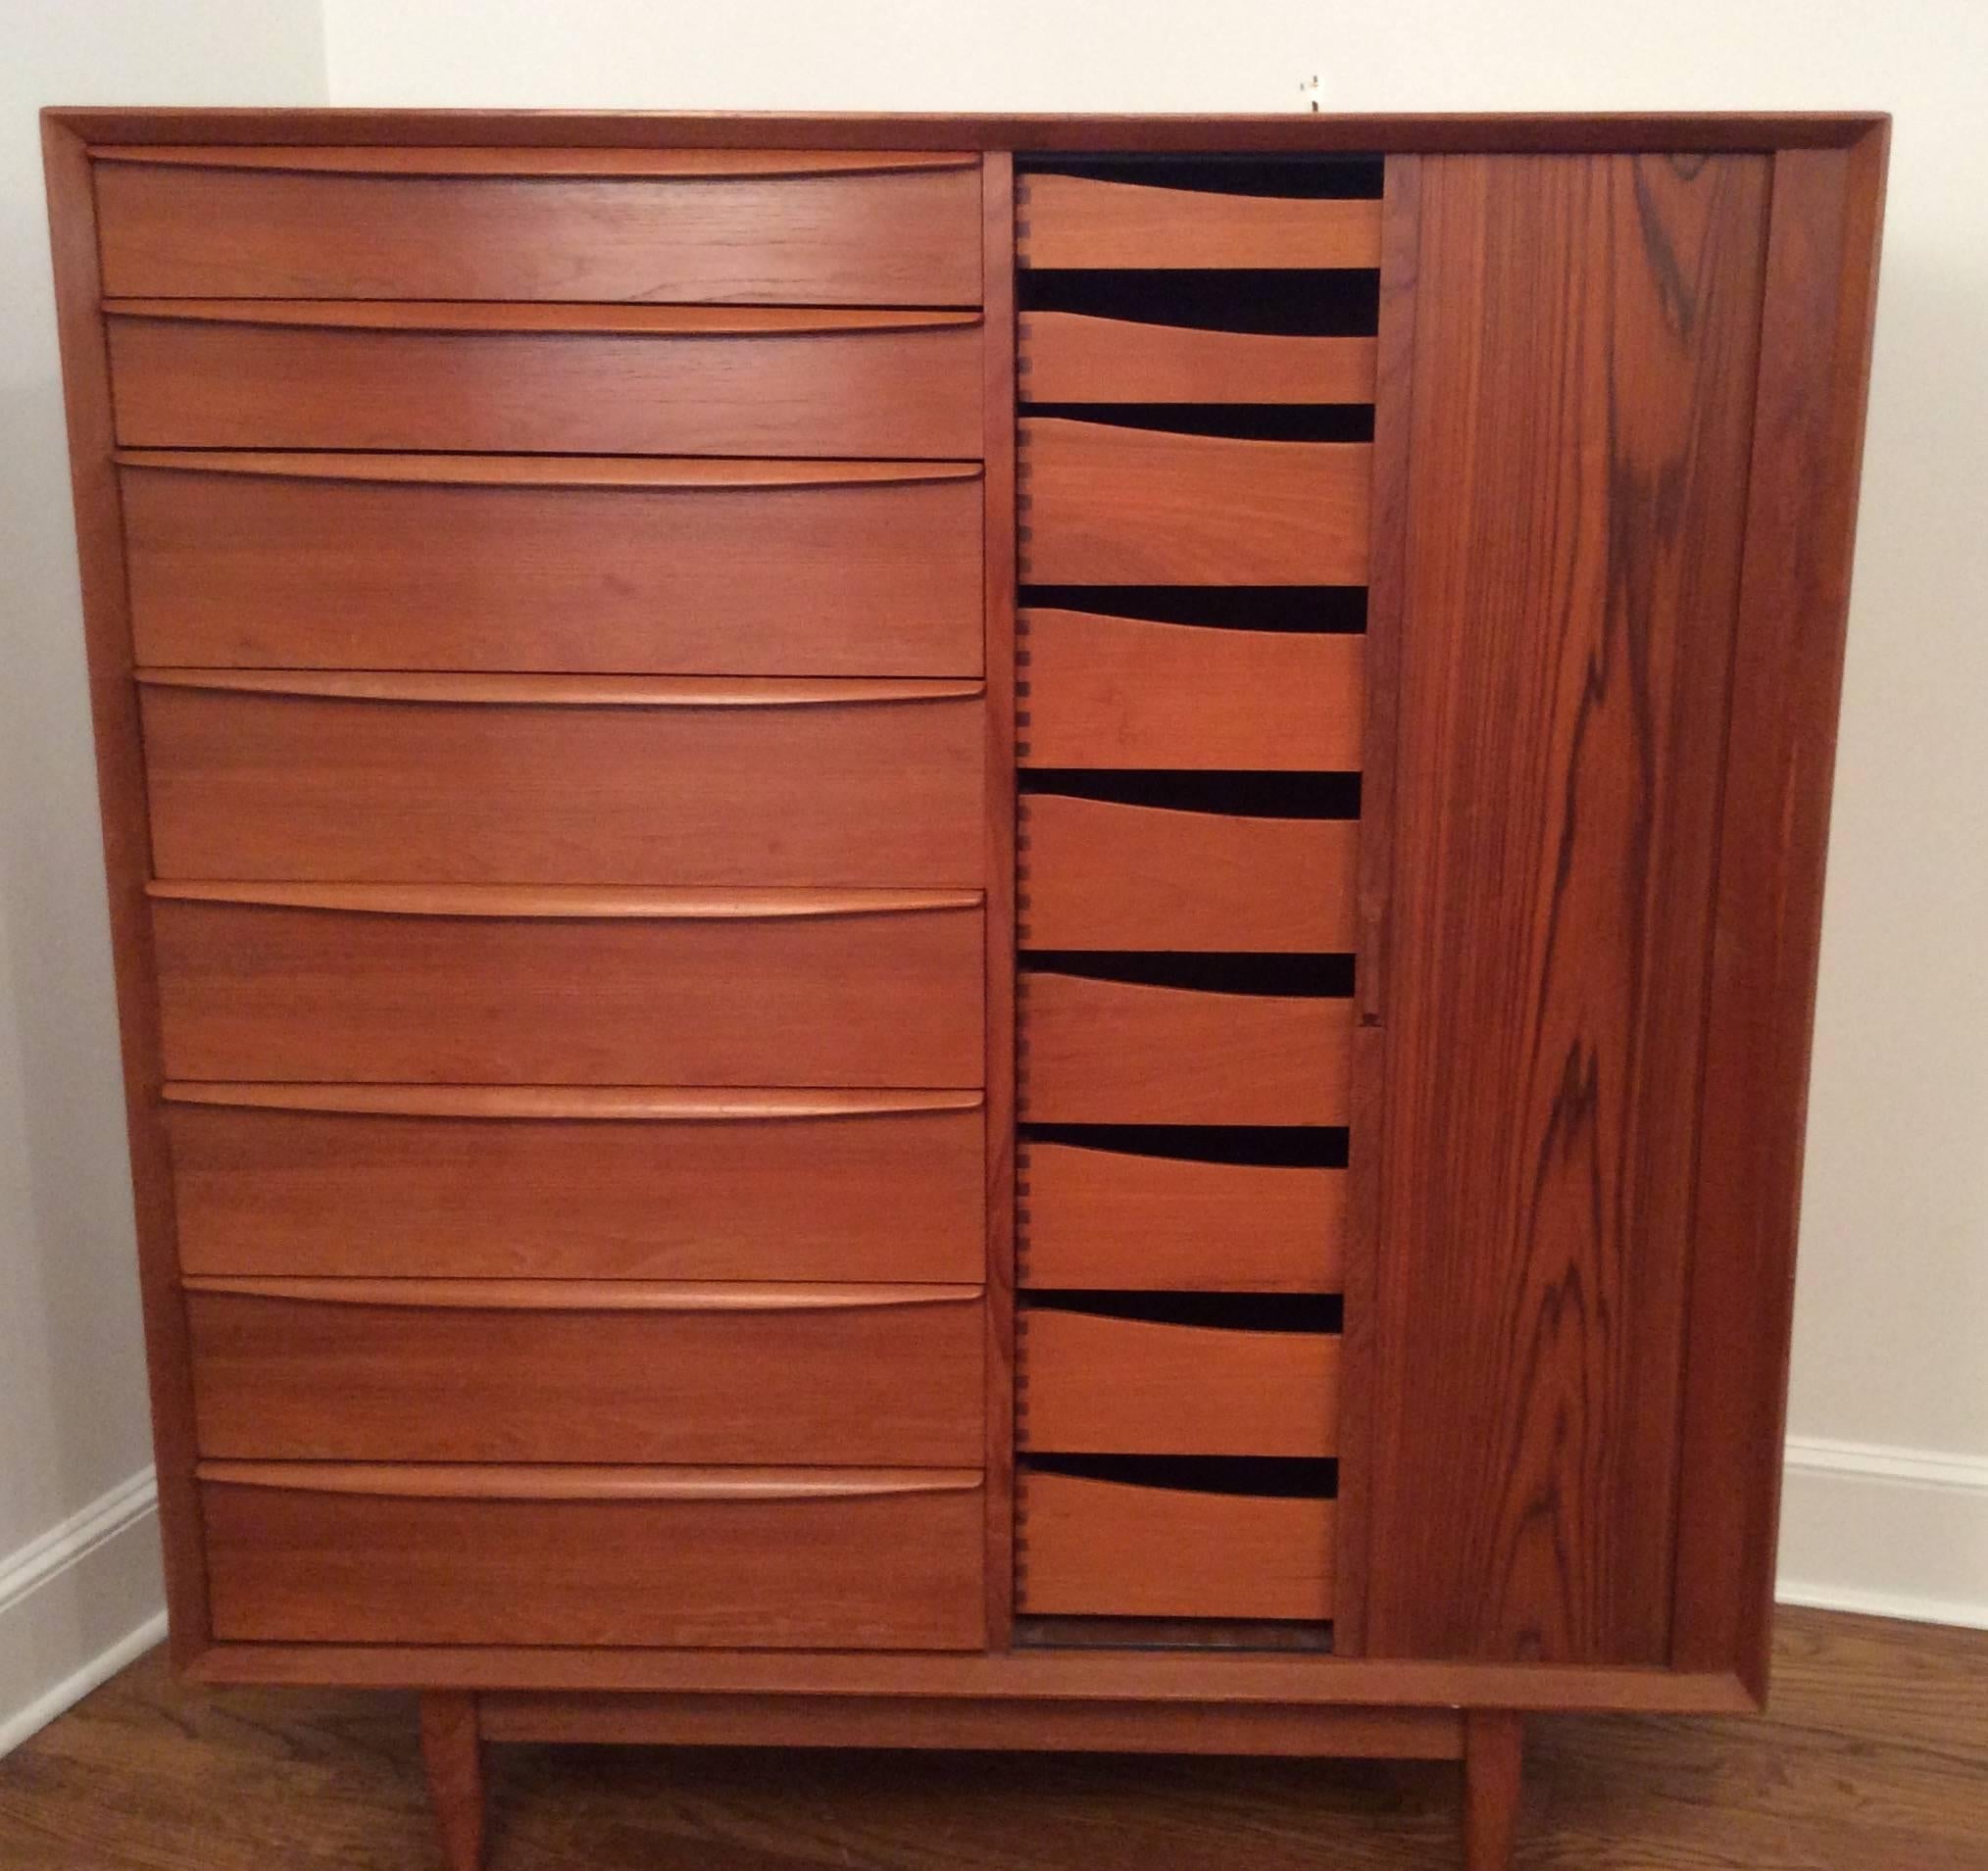 Large Danish dresser designed by Arne Wahl Iversen with beautiful wood grain and tambour sliding door. Back is finished. Bank of eight drawers on left side and bank of nine drawers behind tambour door hold an abundance of clothes or other items. The